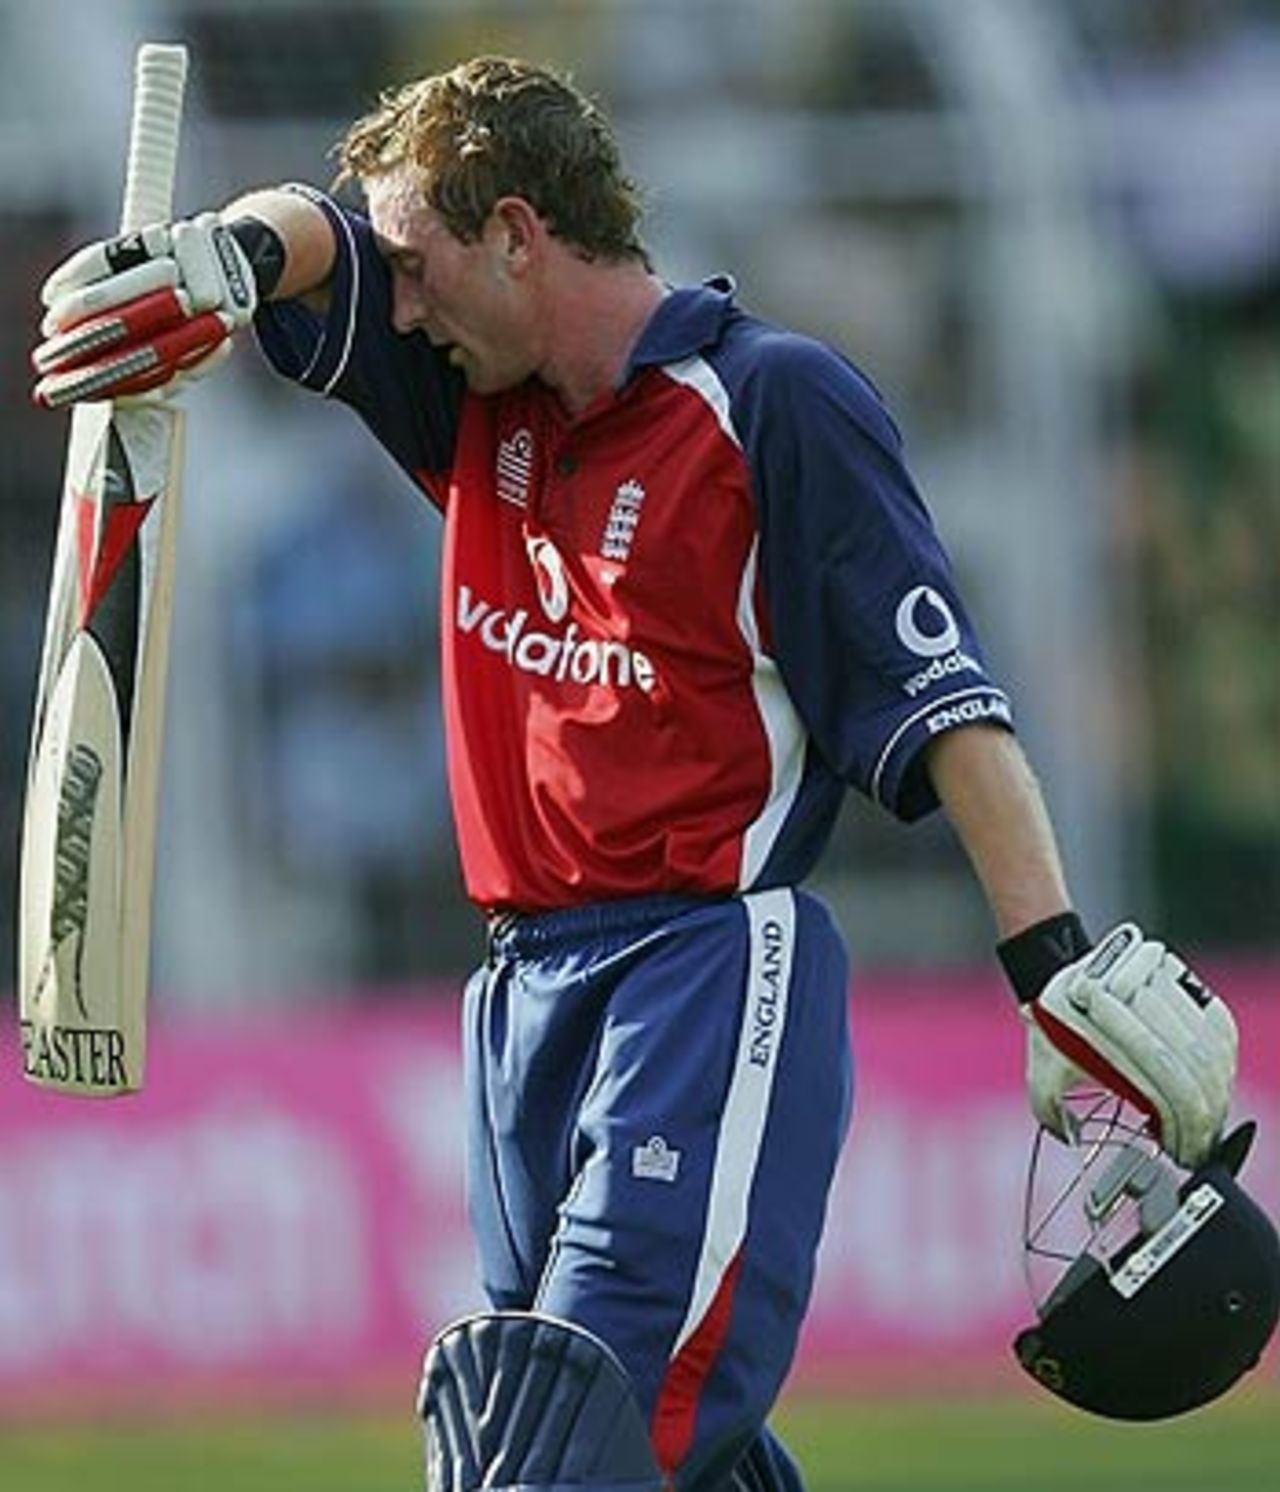 Paul Collingwood could be a good bet to be England's top runscorer in the one-day series